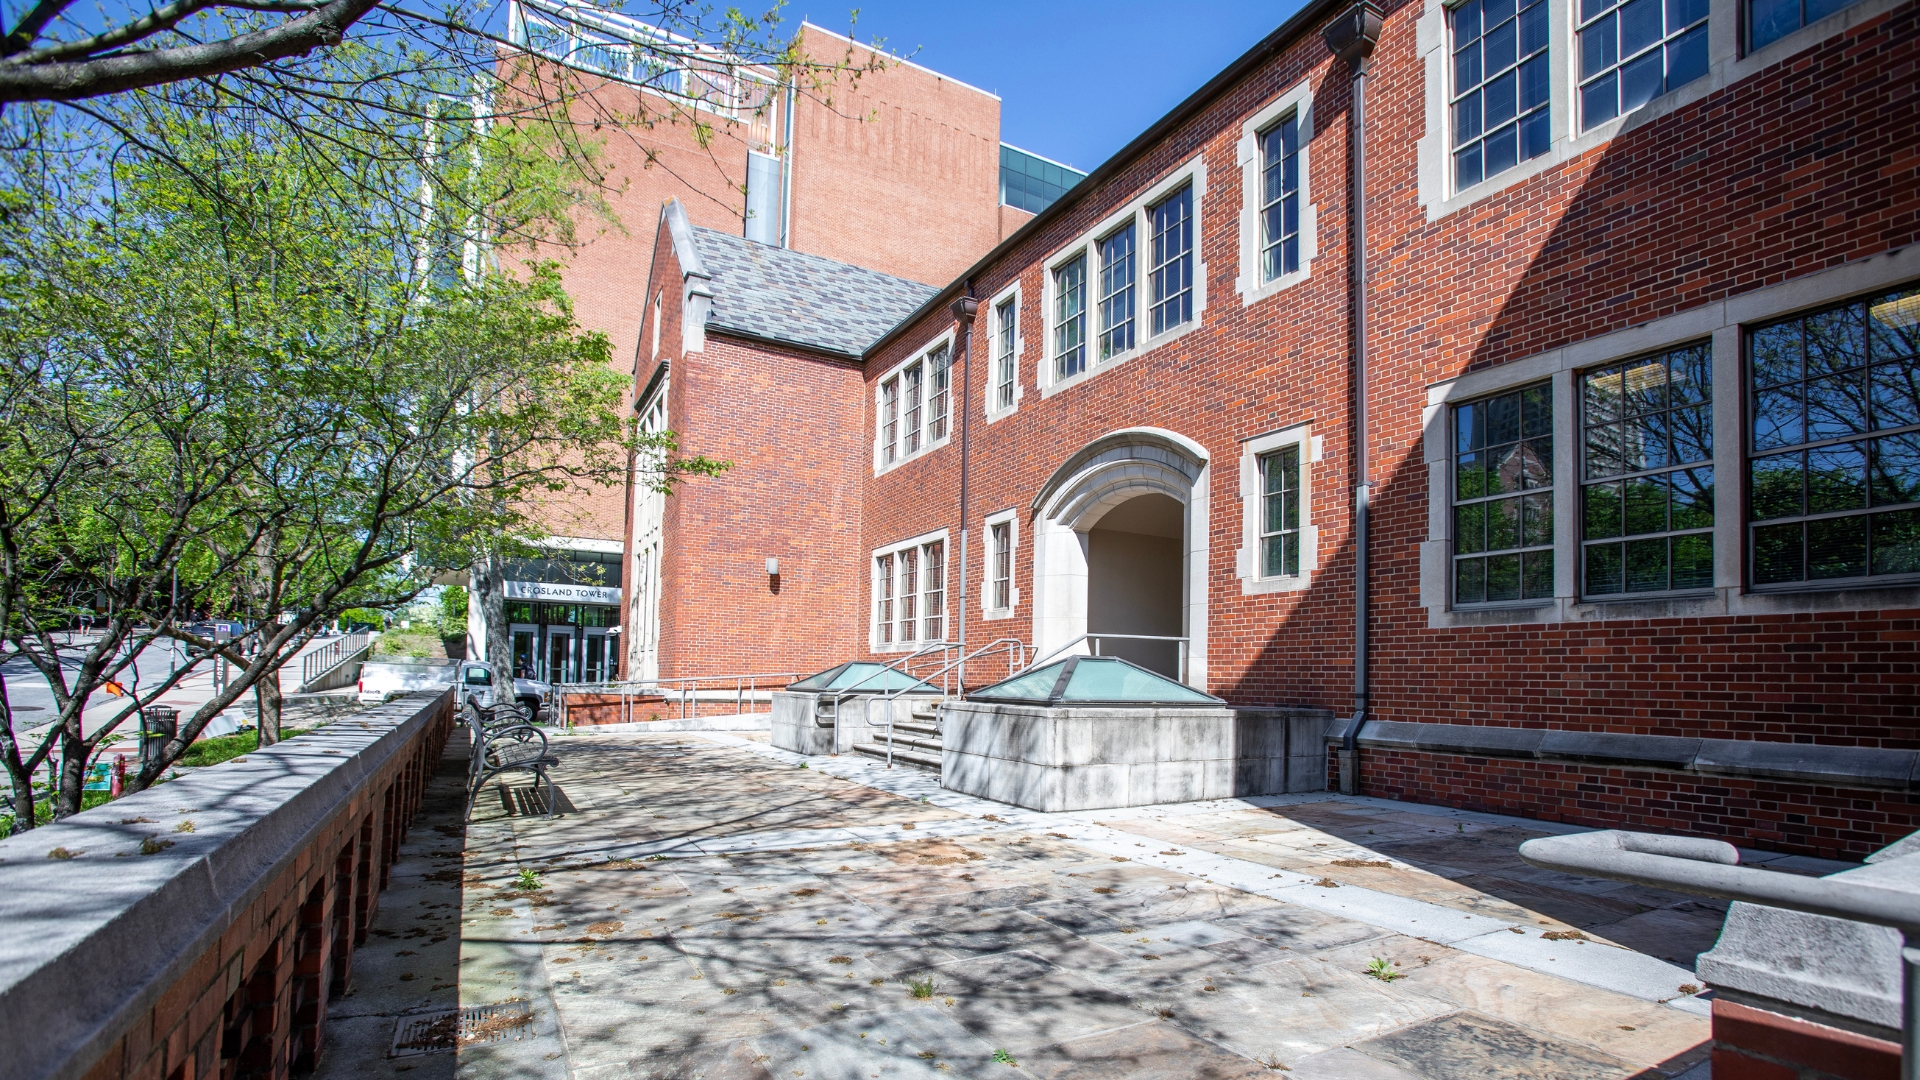 The courtyard of the Old Civil Engineering Building on the Georgia Tech campus.